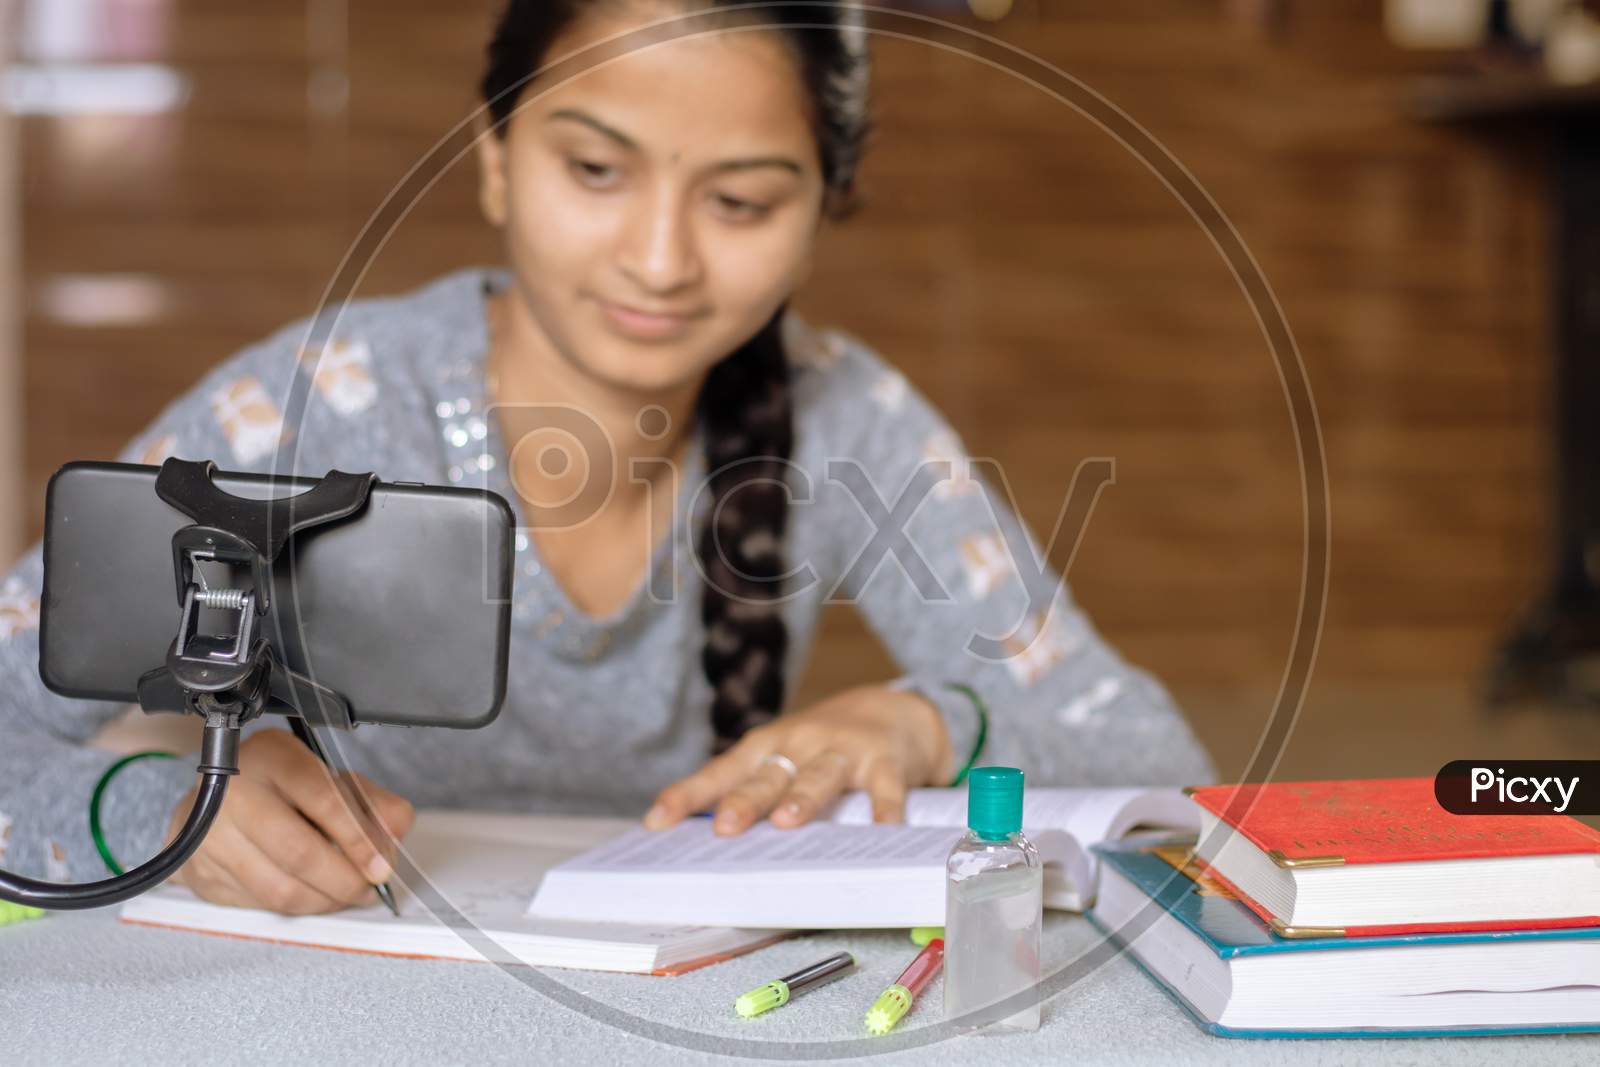 Selective Focus Of Mobile, Concept Of E-Learning At Home Due To Covid-19 Or Coronavirus Isolation - Young College Girl Taking Notes By Looking Into Virtual Class On Mobile Due To Isolation.